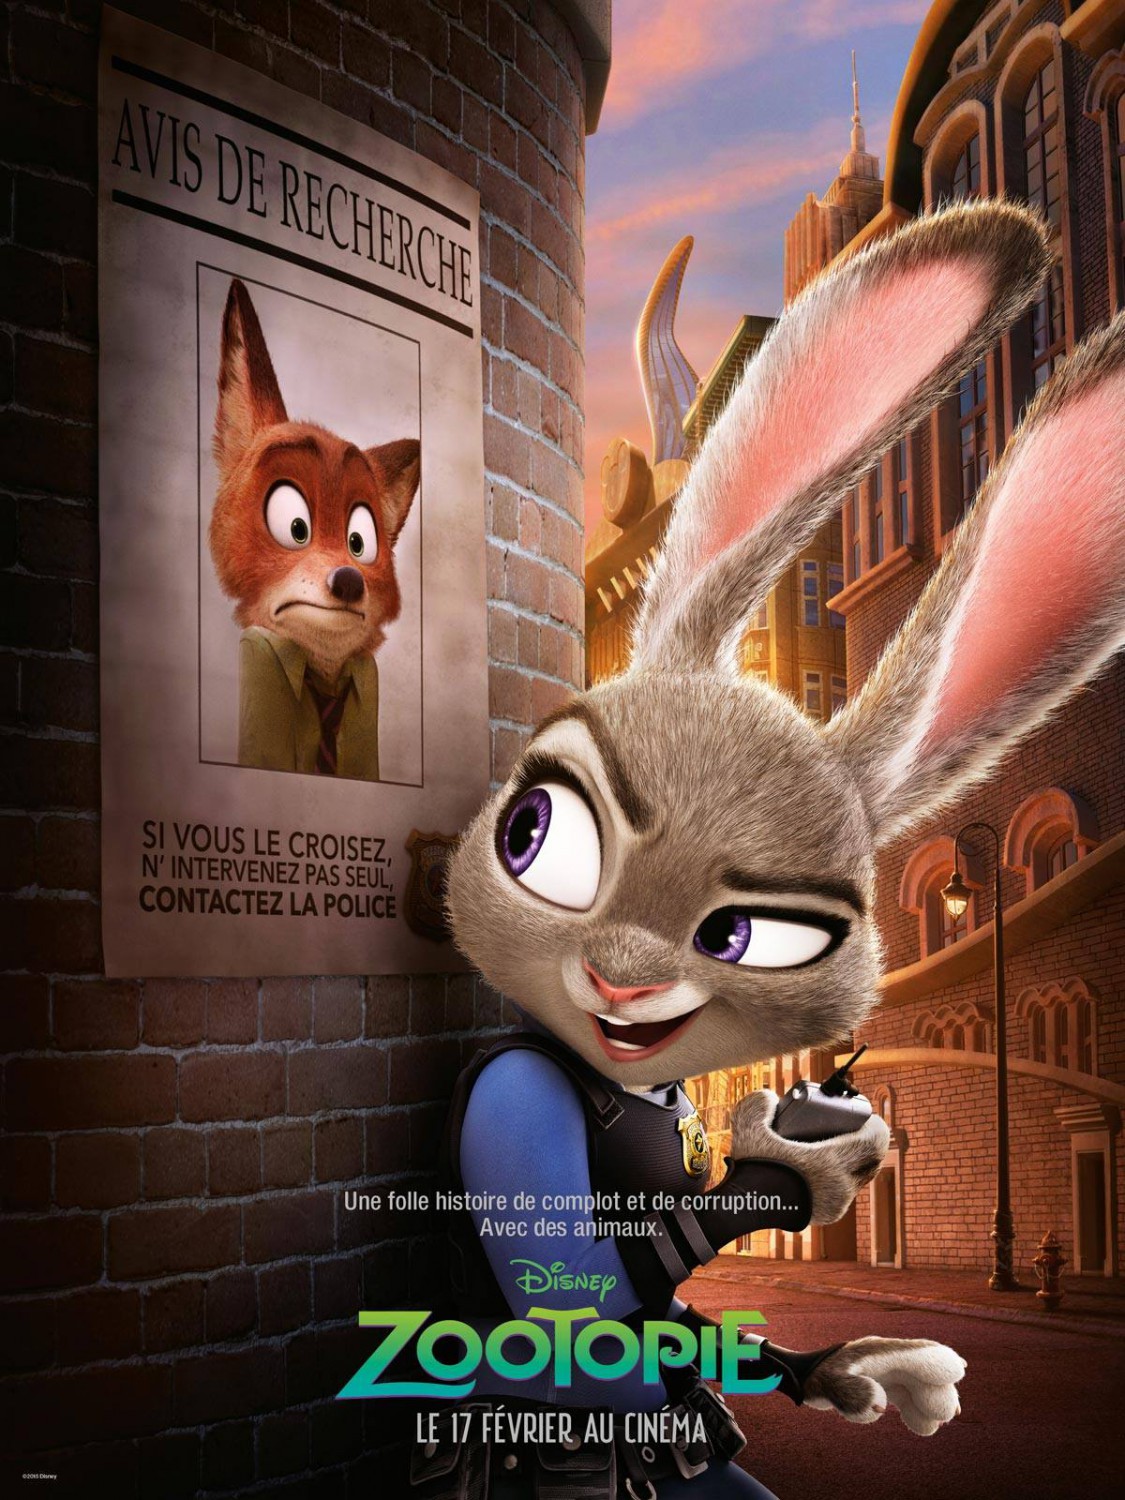 Kelwick the Donkey on X: The Zootopia 2 movie posters look great!   / X